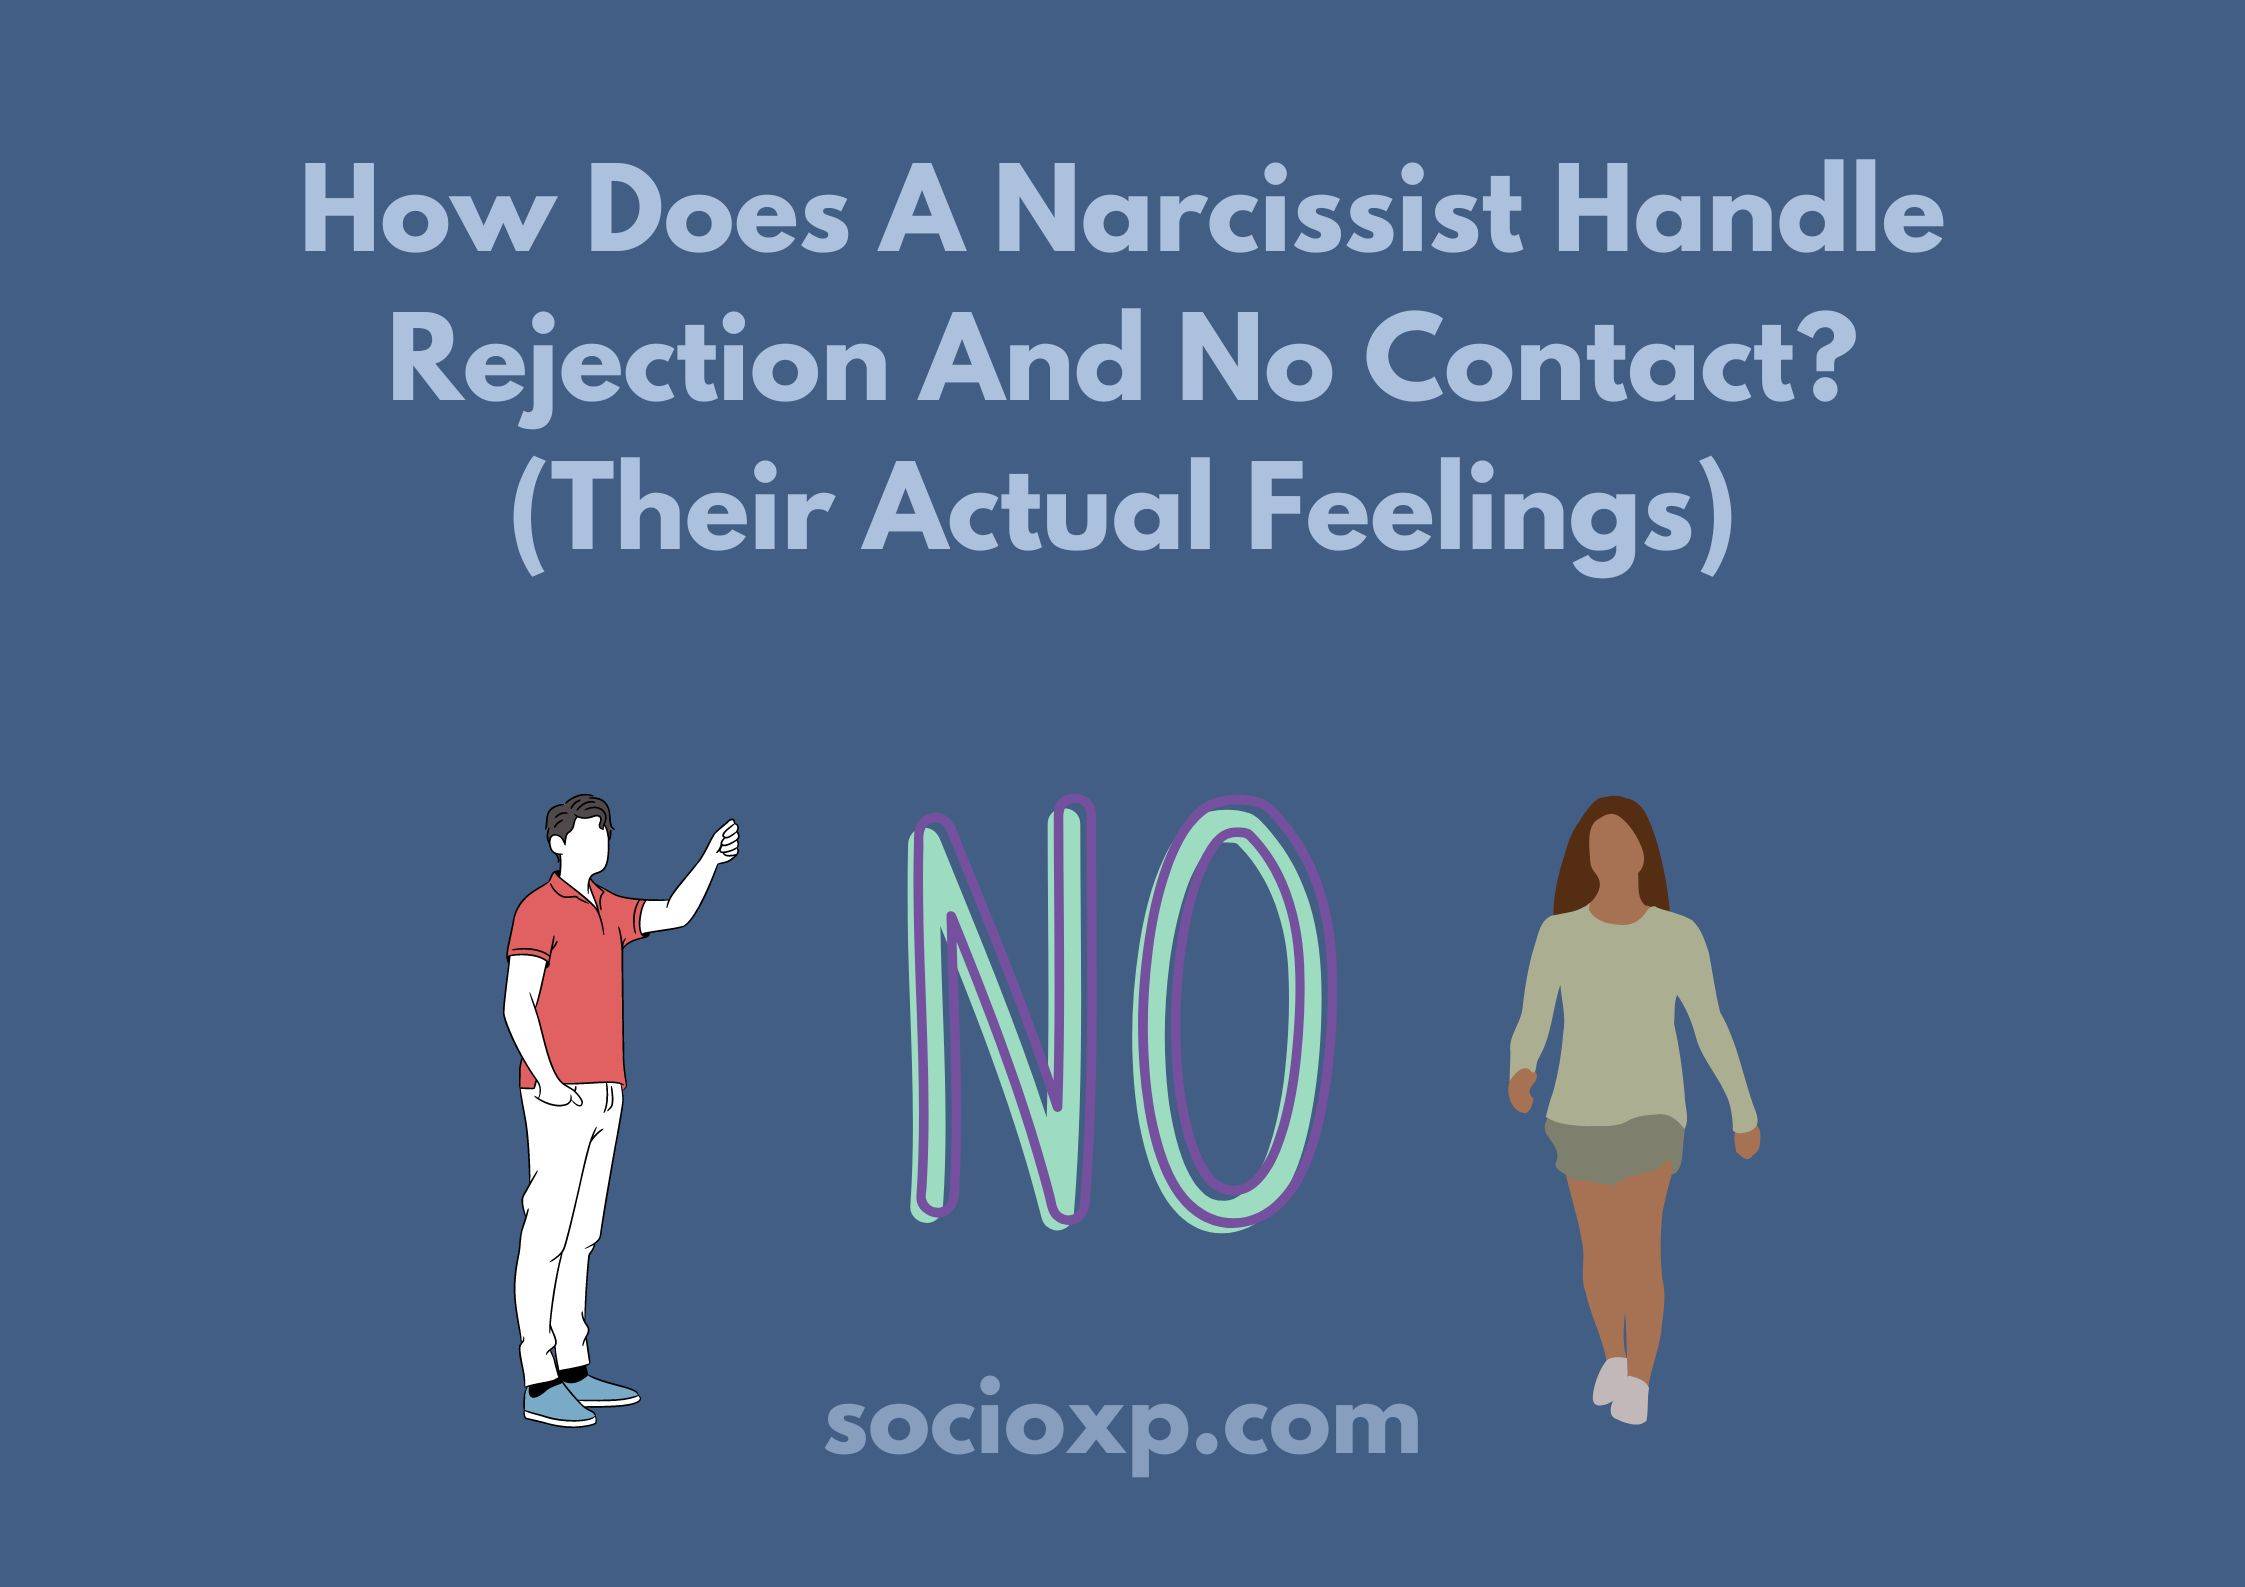 How Does A Narcissist Handle Rejection And No Contact? (Their Actual Feelings)